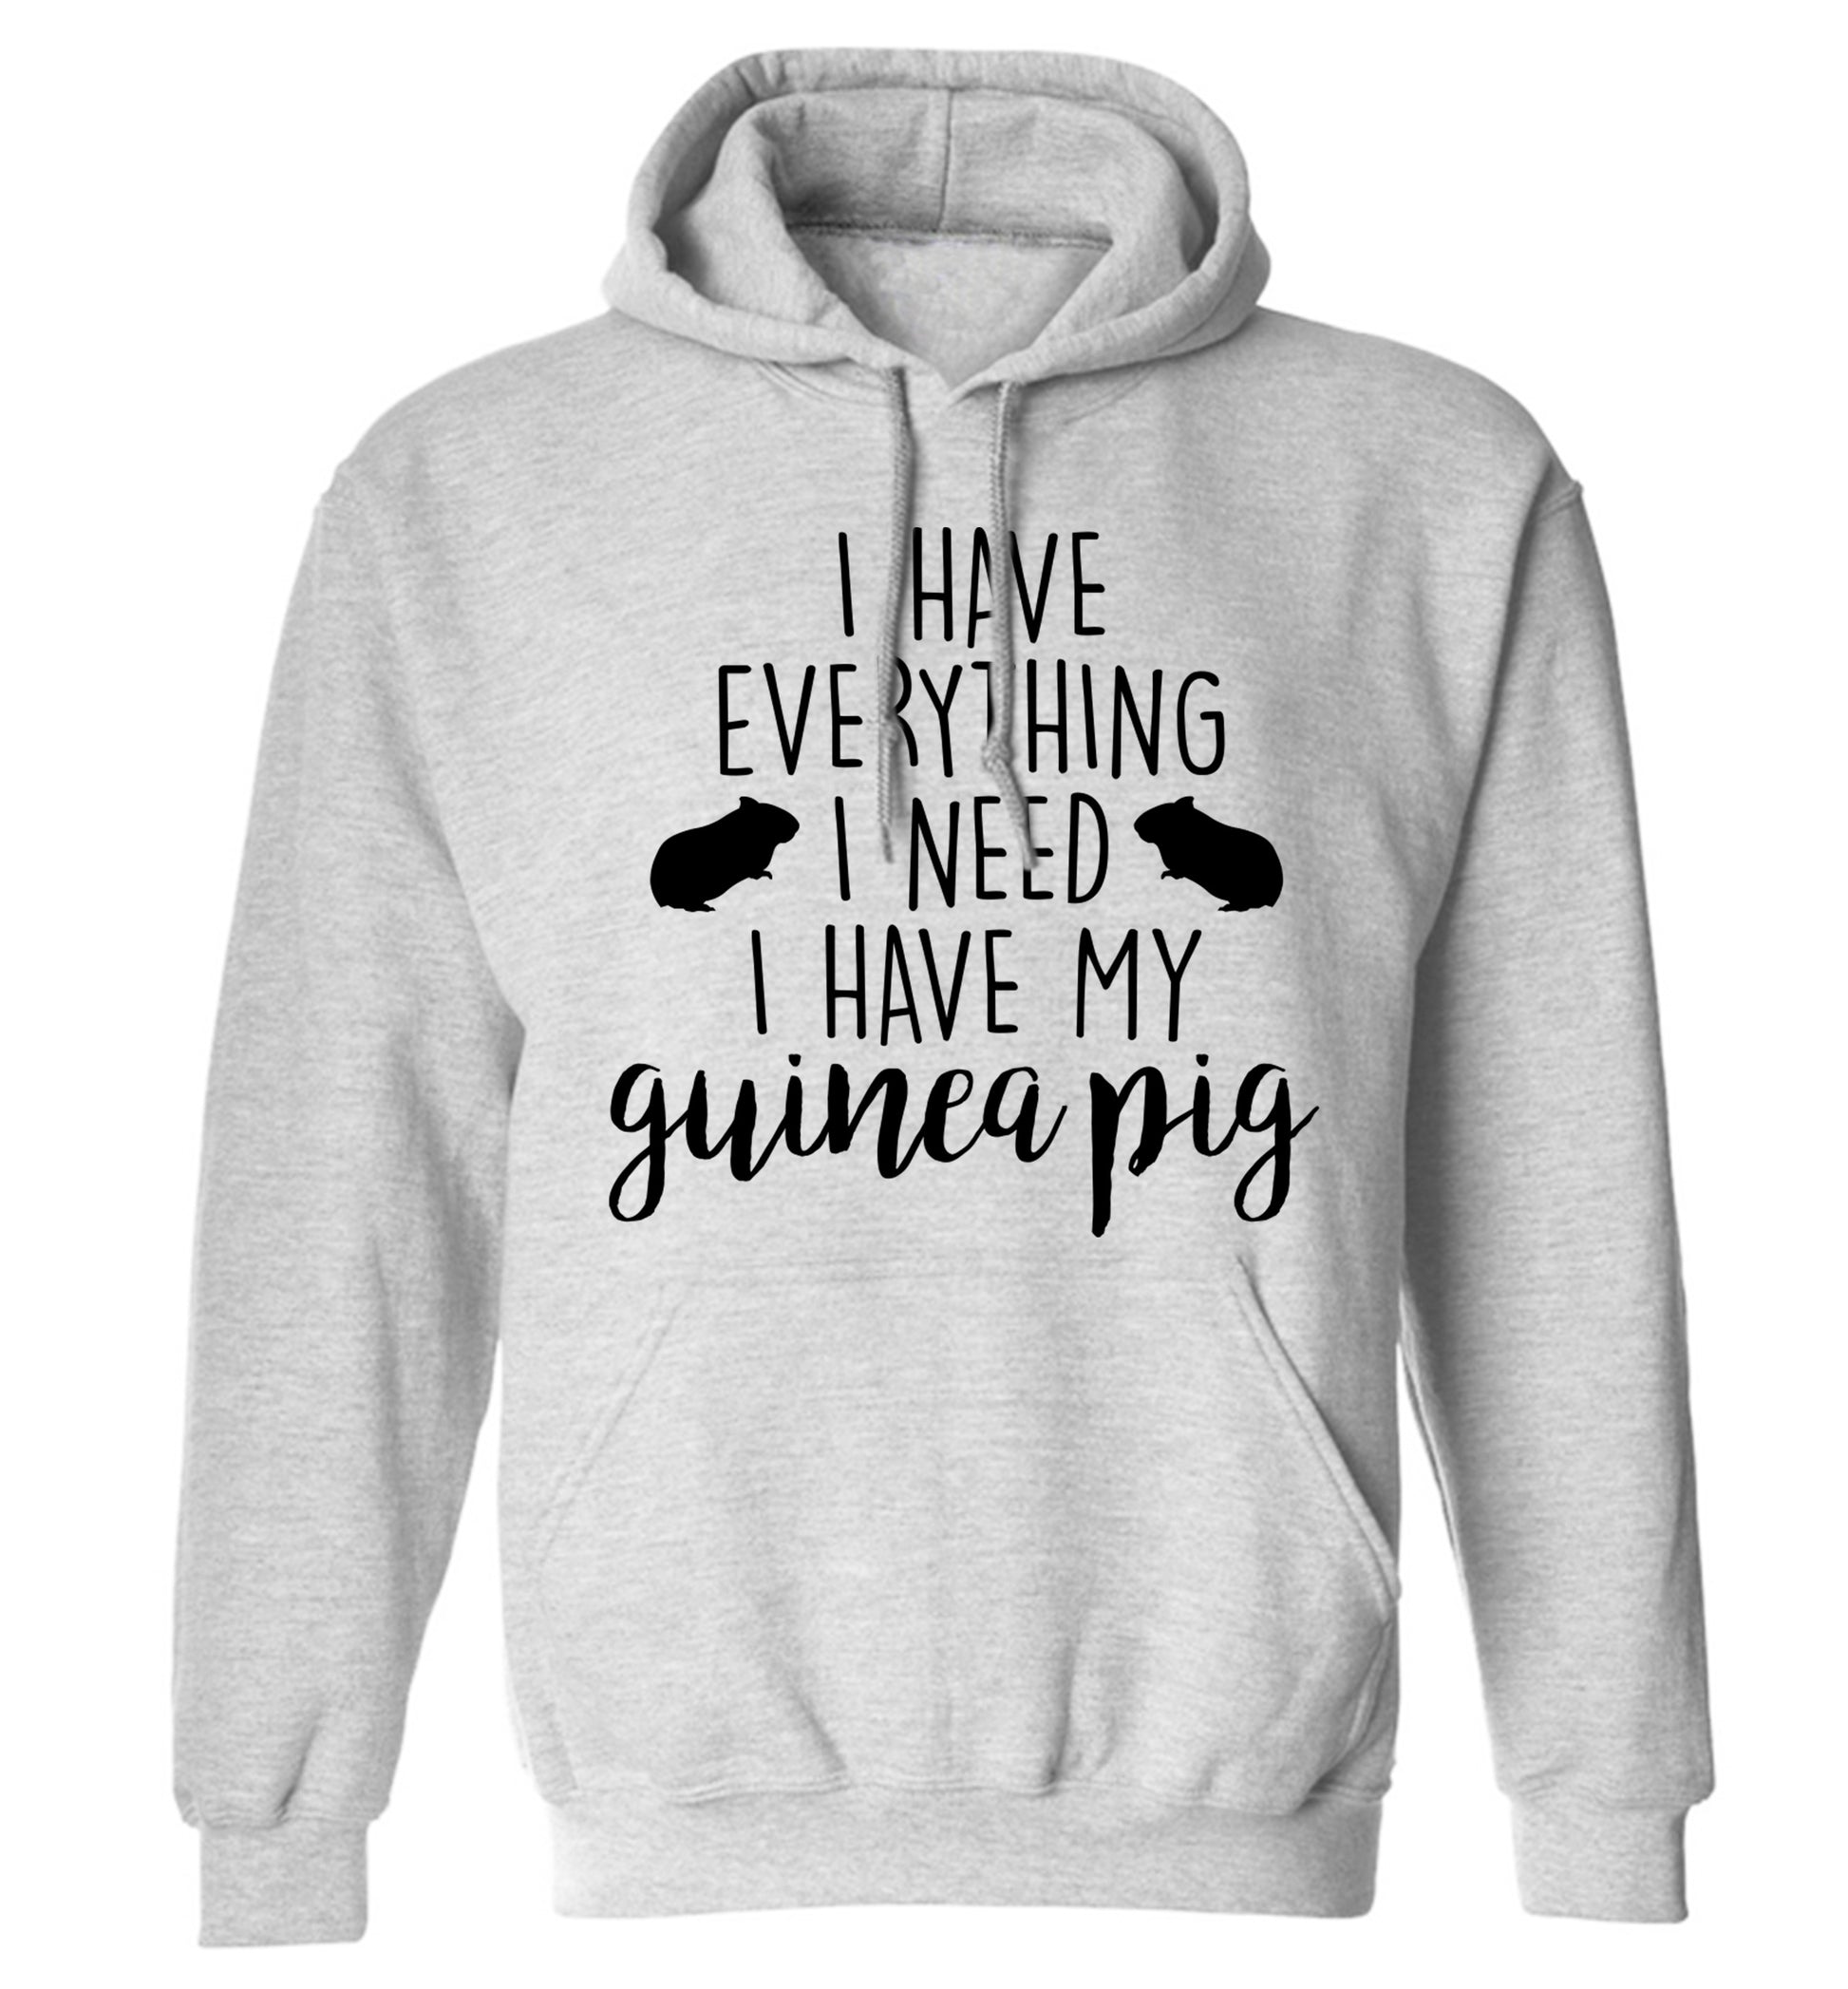 I have everything I need, I have my guinea pig adults unisex grey hoodie 2XL